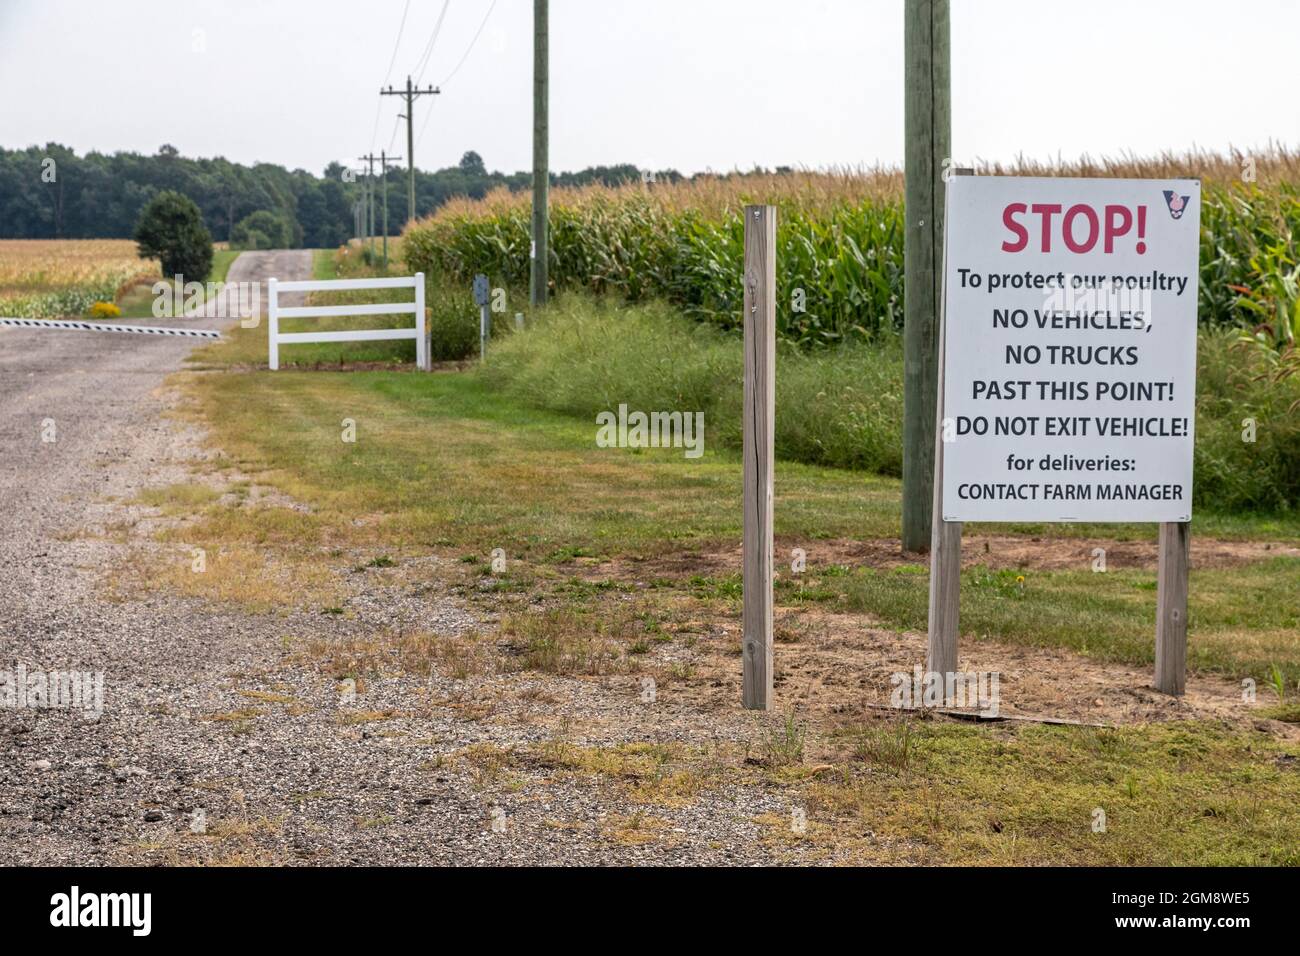 Martin, Michigan - A sign at an entrance to the Vande Bunte Egg farm prohibits visitors to prevent spread of disease to its 2.7 million laying hens an Stock Photo